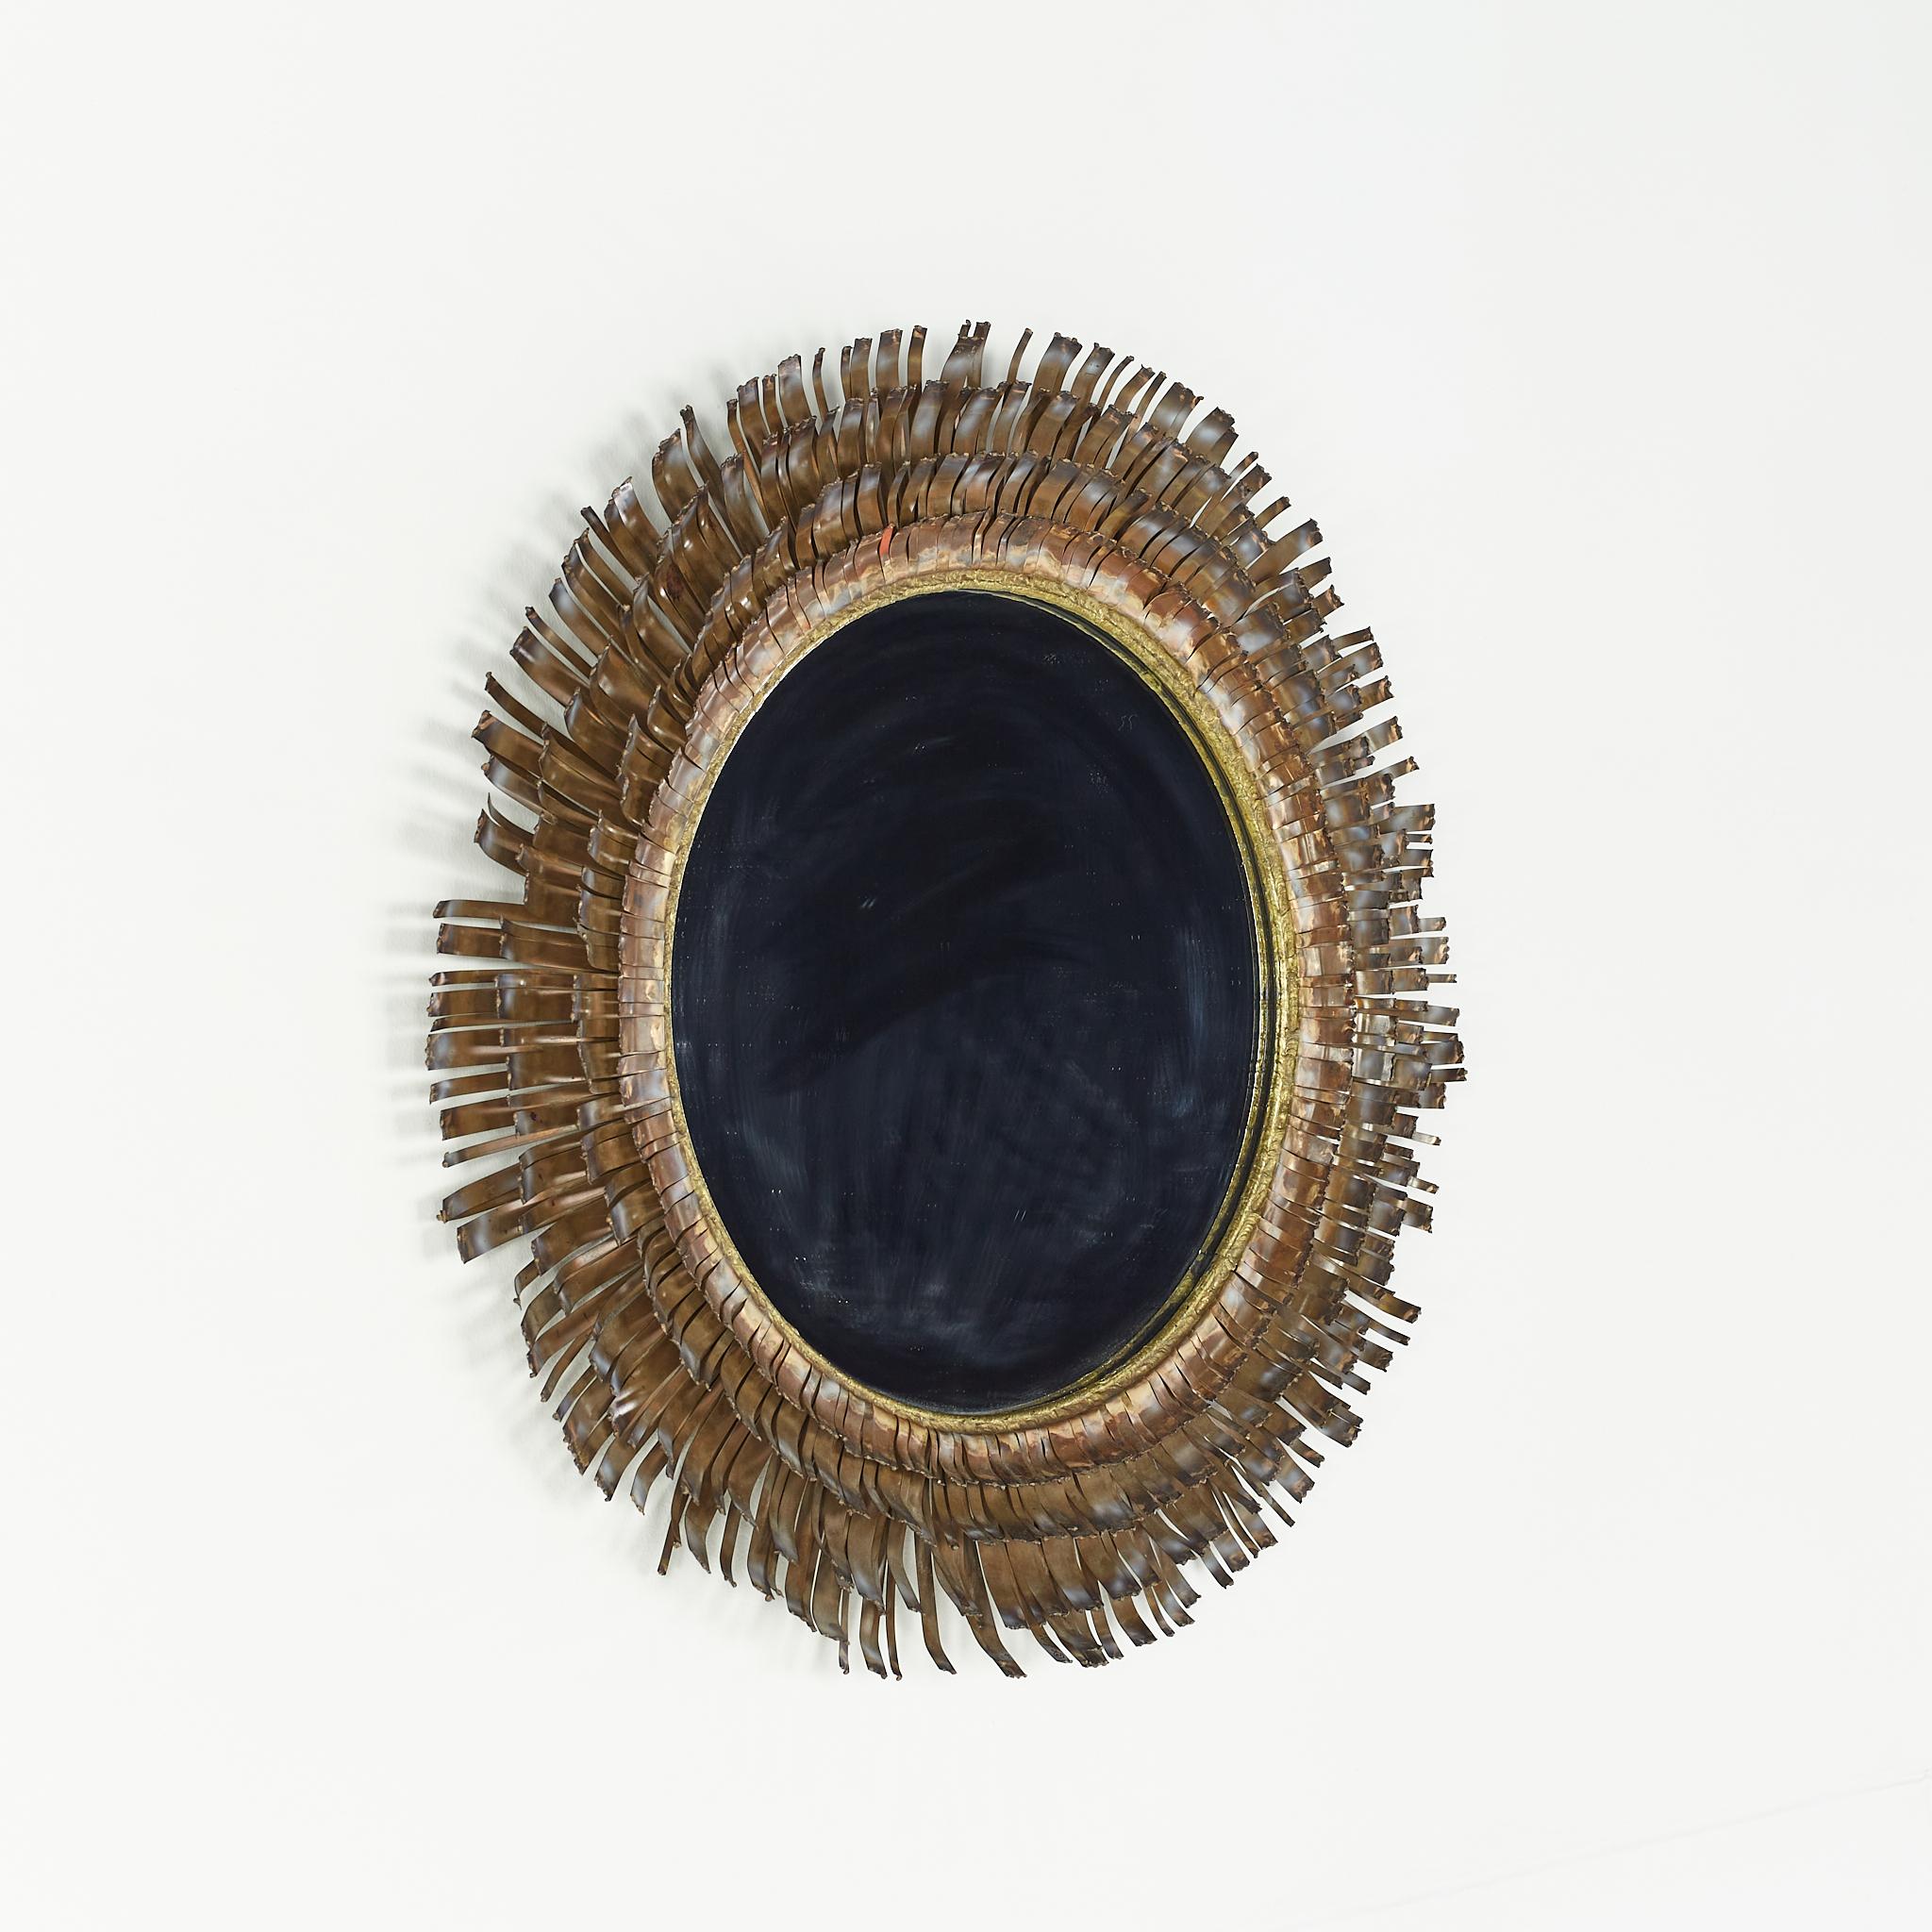 Curtis Jere mid century brutalist copper and brass eyelash mirror.

This mirror measures: 32 wide x 3 deep x 32 inches high.

Great Vintage condition.

We take our photos in a controlled lighting studio to show as much detail as possible. We